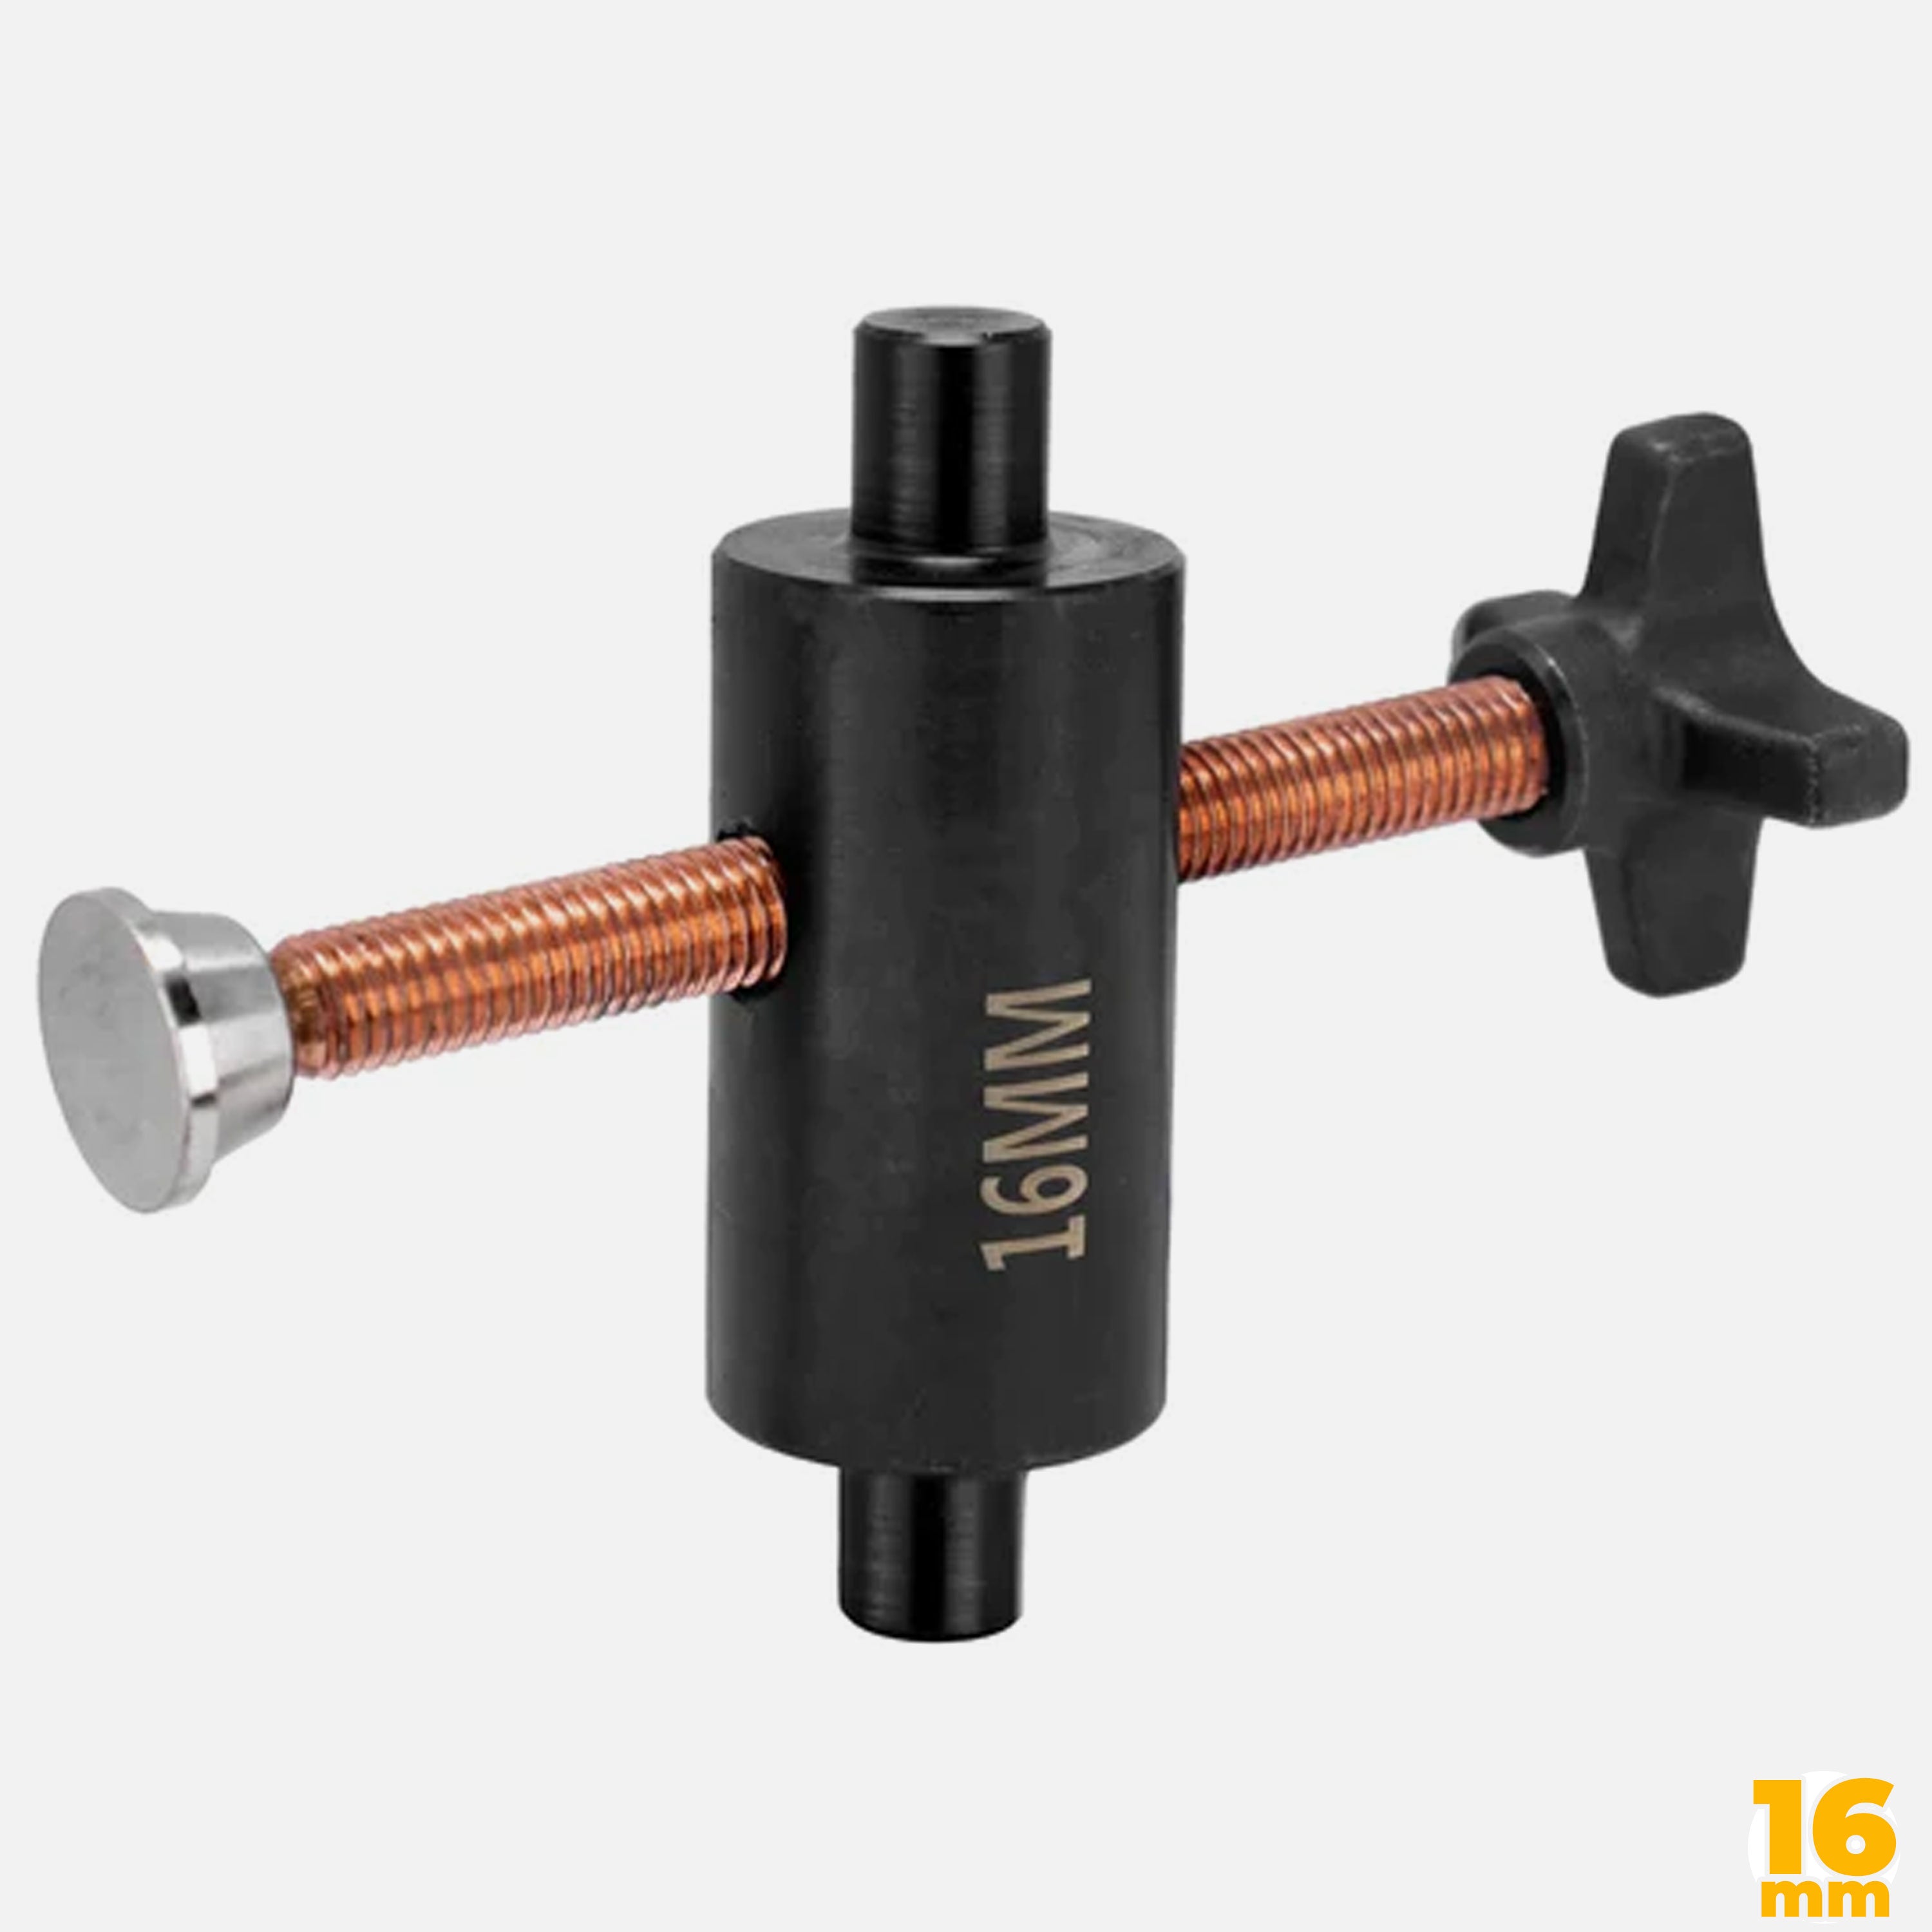 Side Push Clamp XL [16mm System]